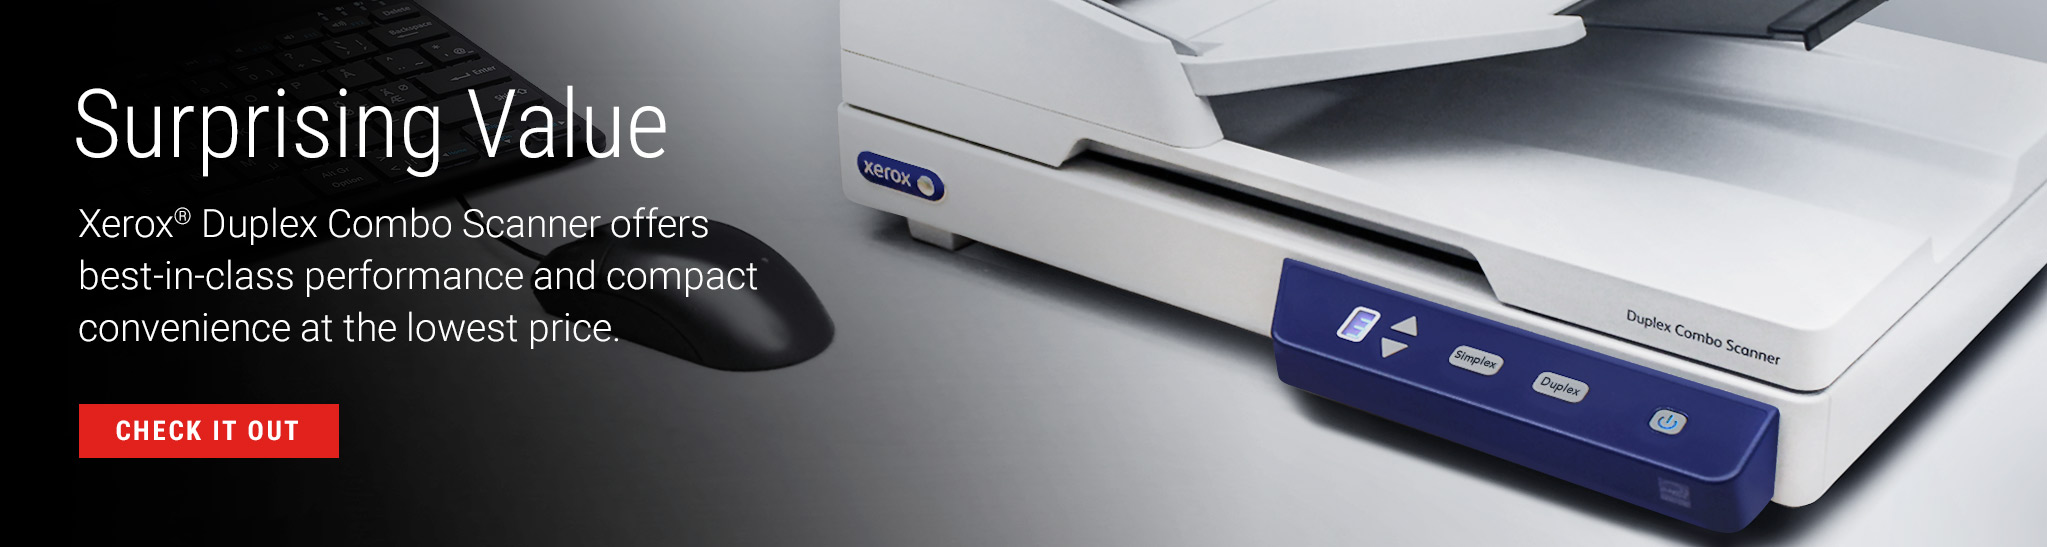 Duplex Combo Scanner - Learn More